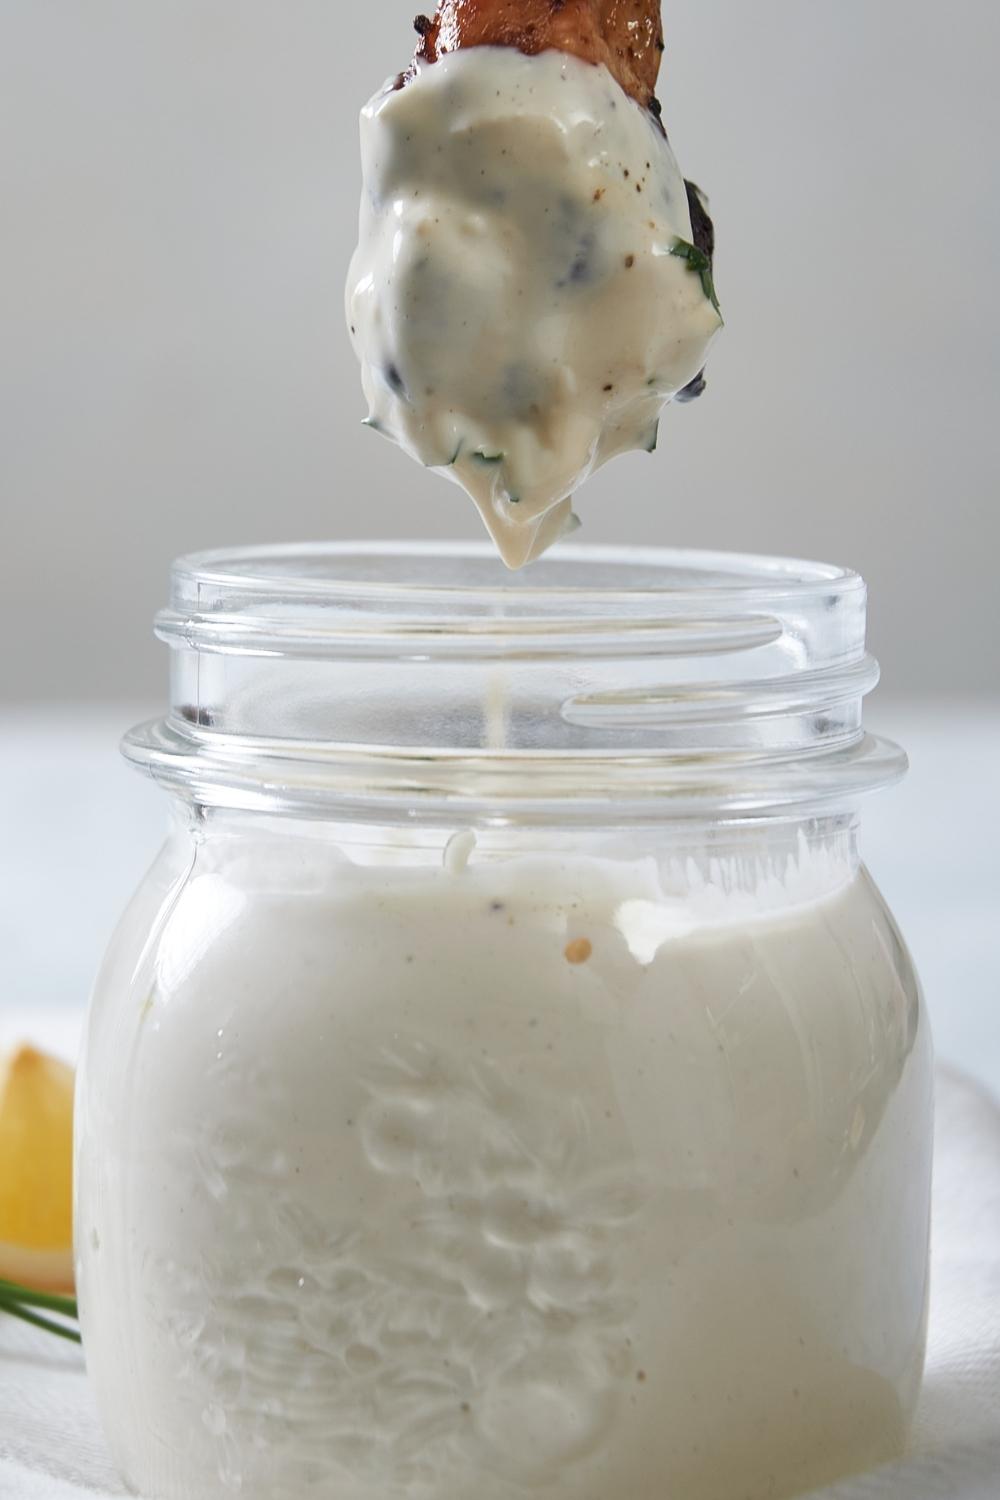 A small mason jar with homemade Alabama white sauce in it. A chicken wing has just been dipped into it and is suspended over top of the jar.